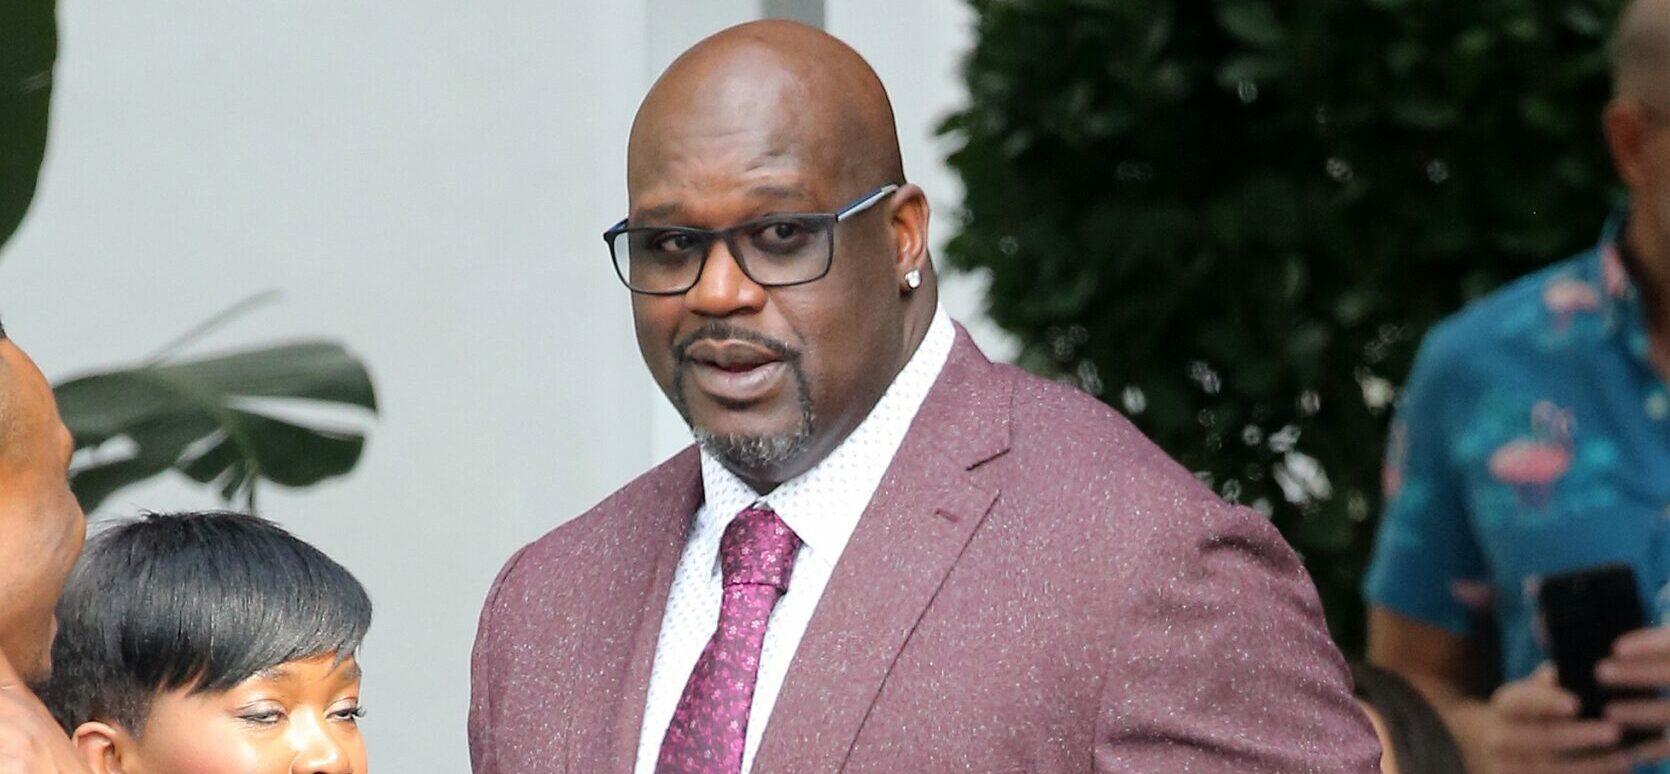 Shaquille O’Neal Credits ‘Eating Right’ For INCREDIBLE 40-Pound Weight Loss